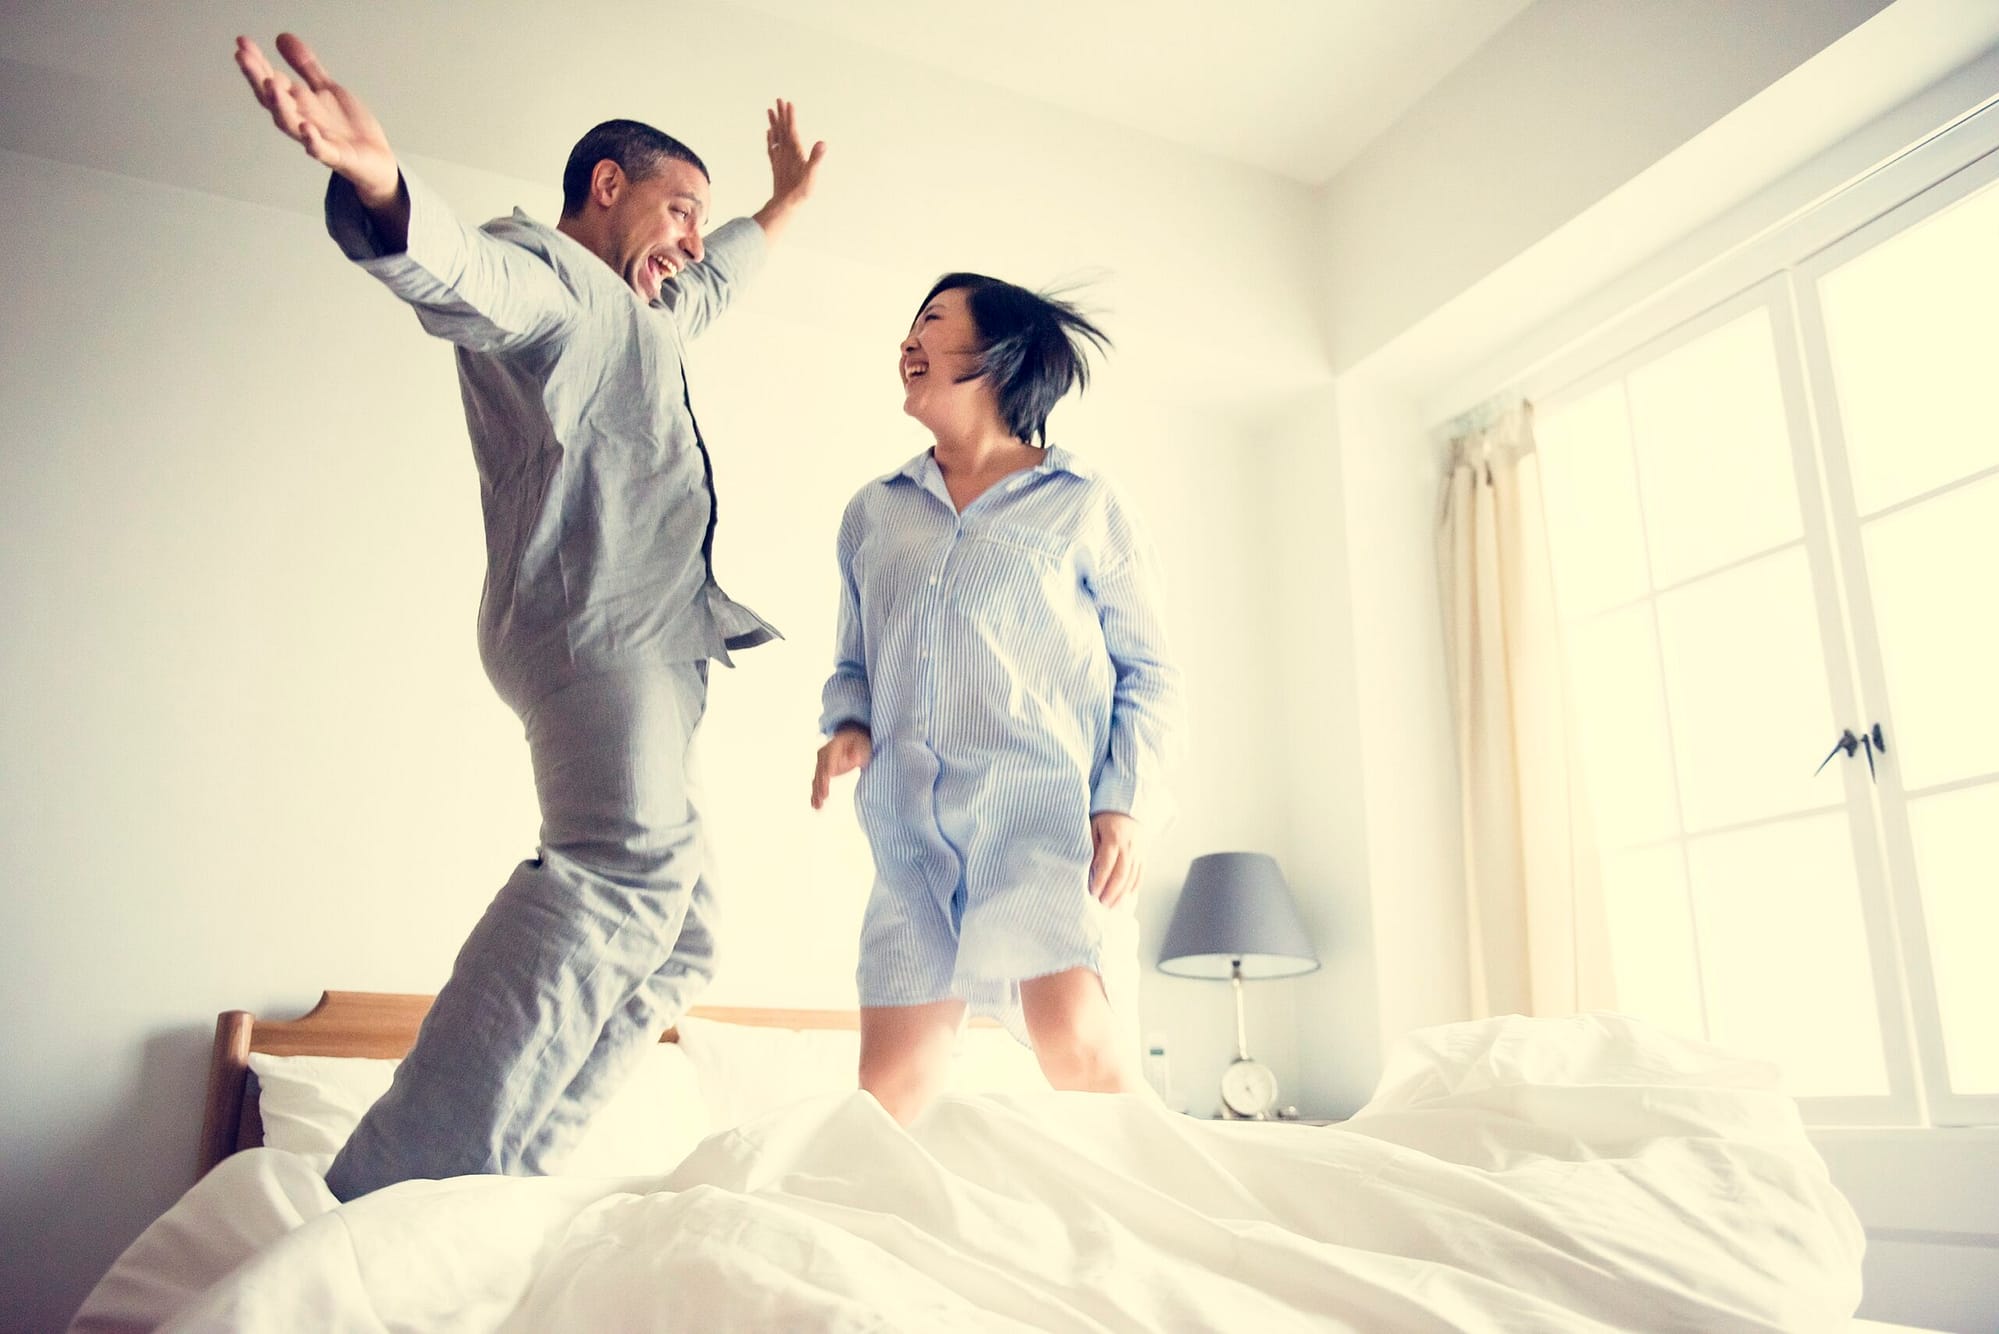 A couple jumps for joy after purchasing a new matress at Discount Mattress Lady.